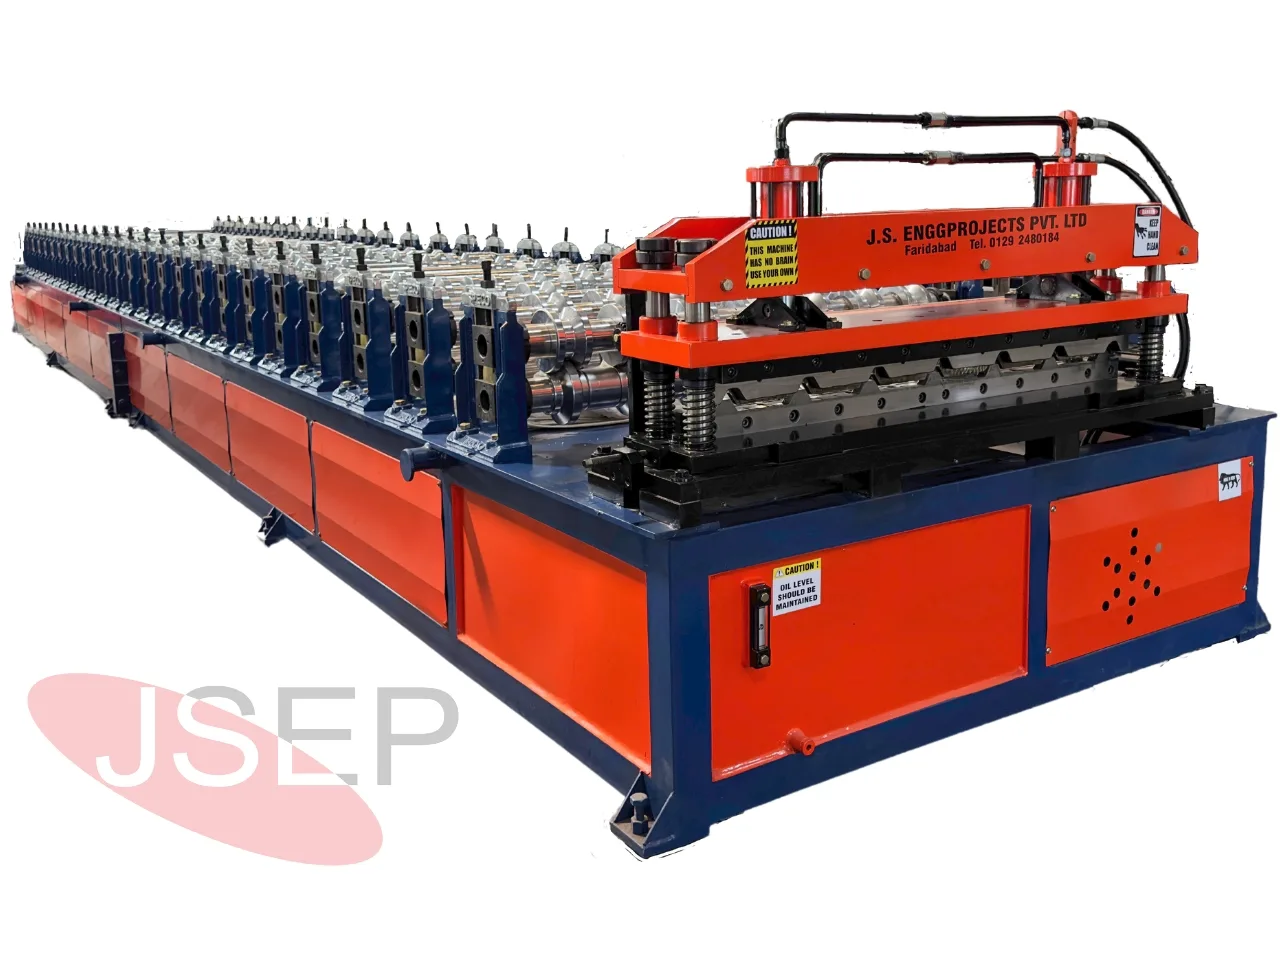 High Rib Roll Forming Machine Manufacturer in india